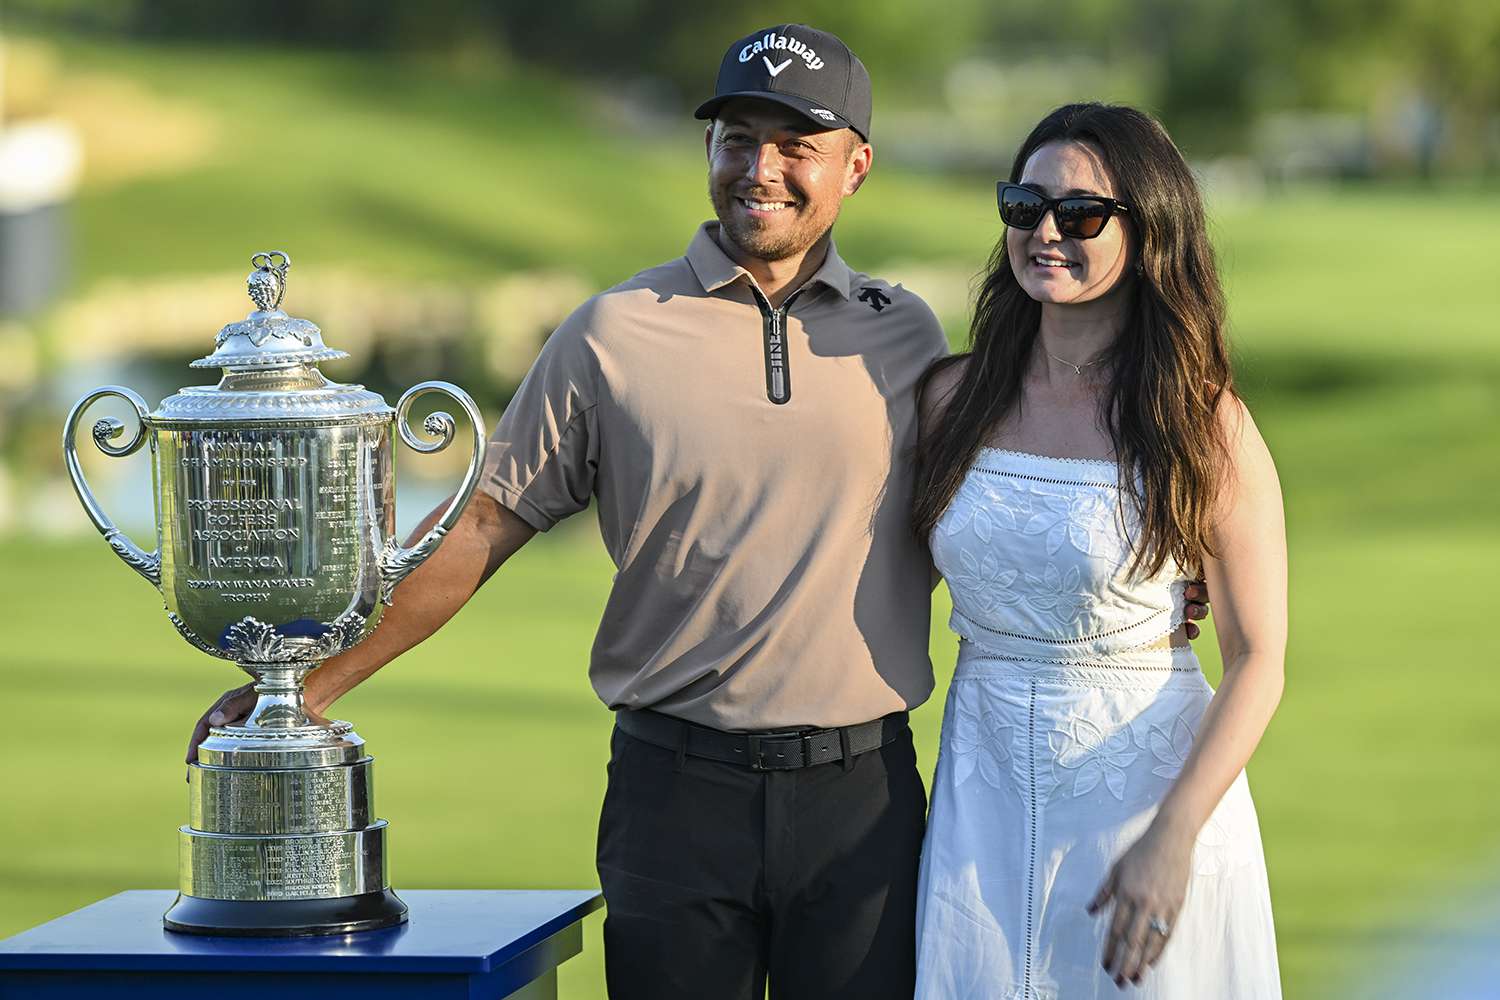 Why Xander Schauffele's Wife Was So Emotional After PGA Win: 'She Knows How Much This Means to Me' (Exclusive)